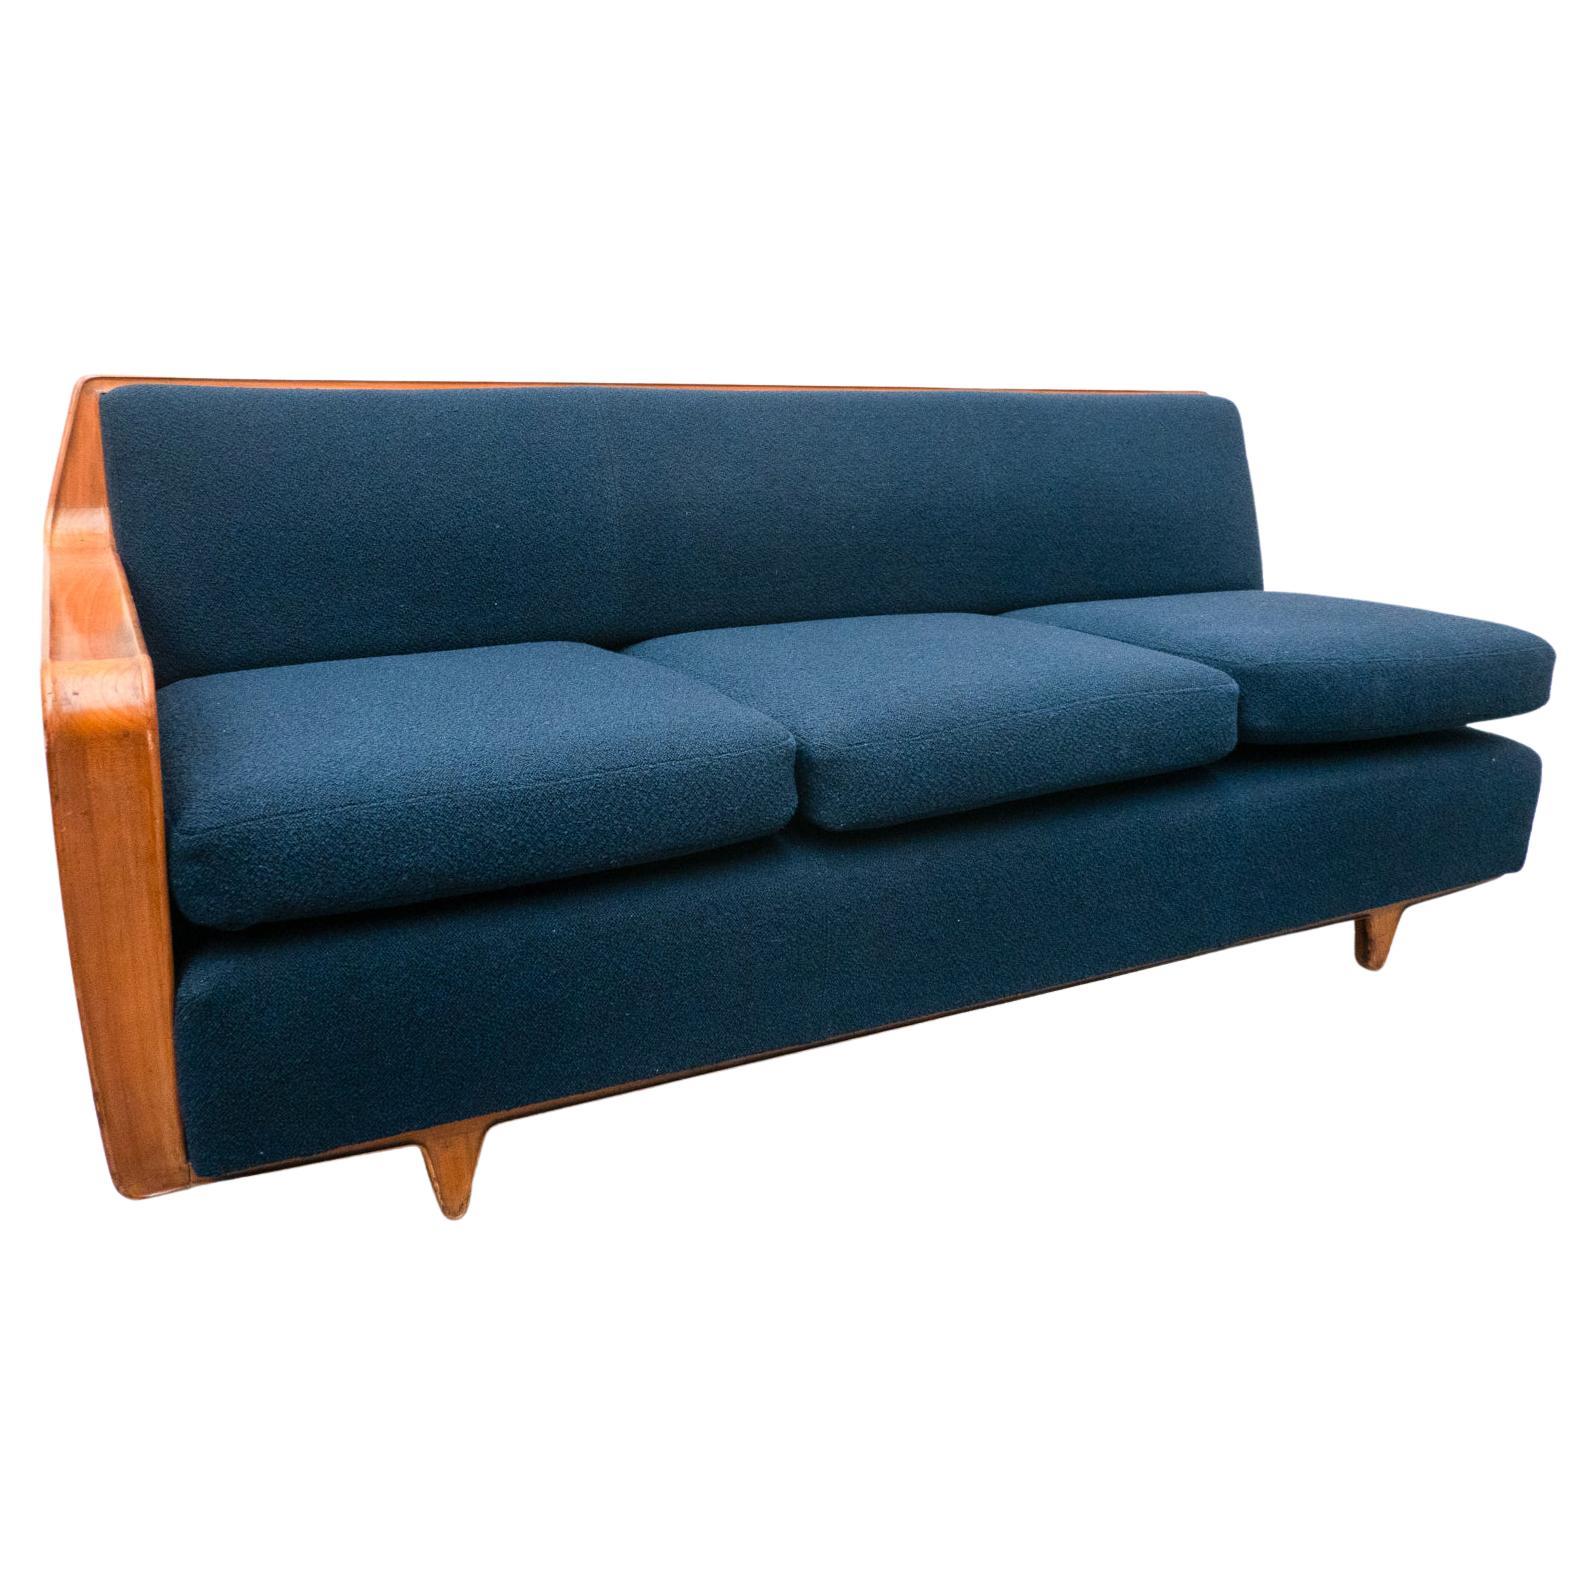 Mid-Century Modern Blue Sofa Attributed to Melchiorre Bega, Cherry Wood, Italy  For Sale